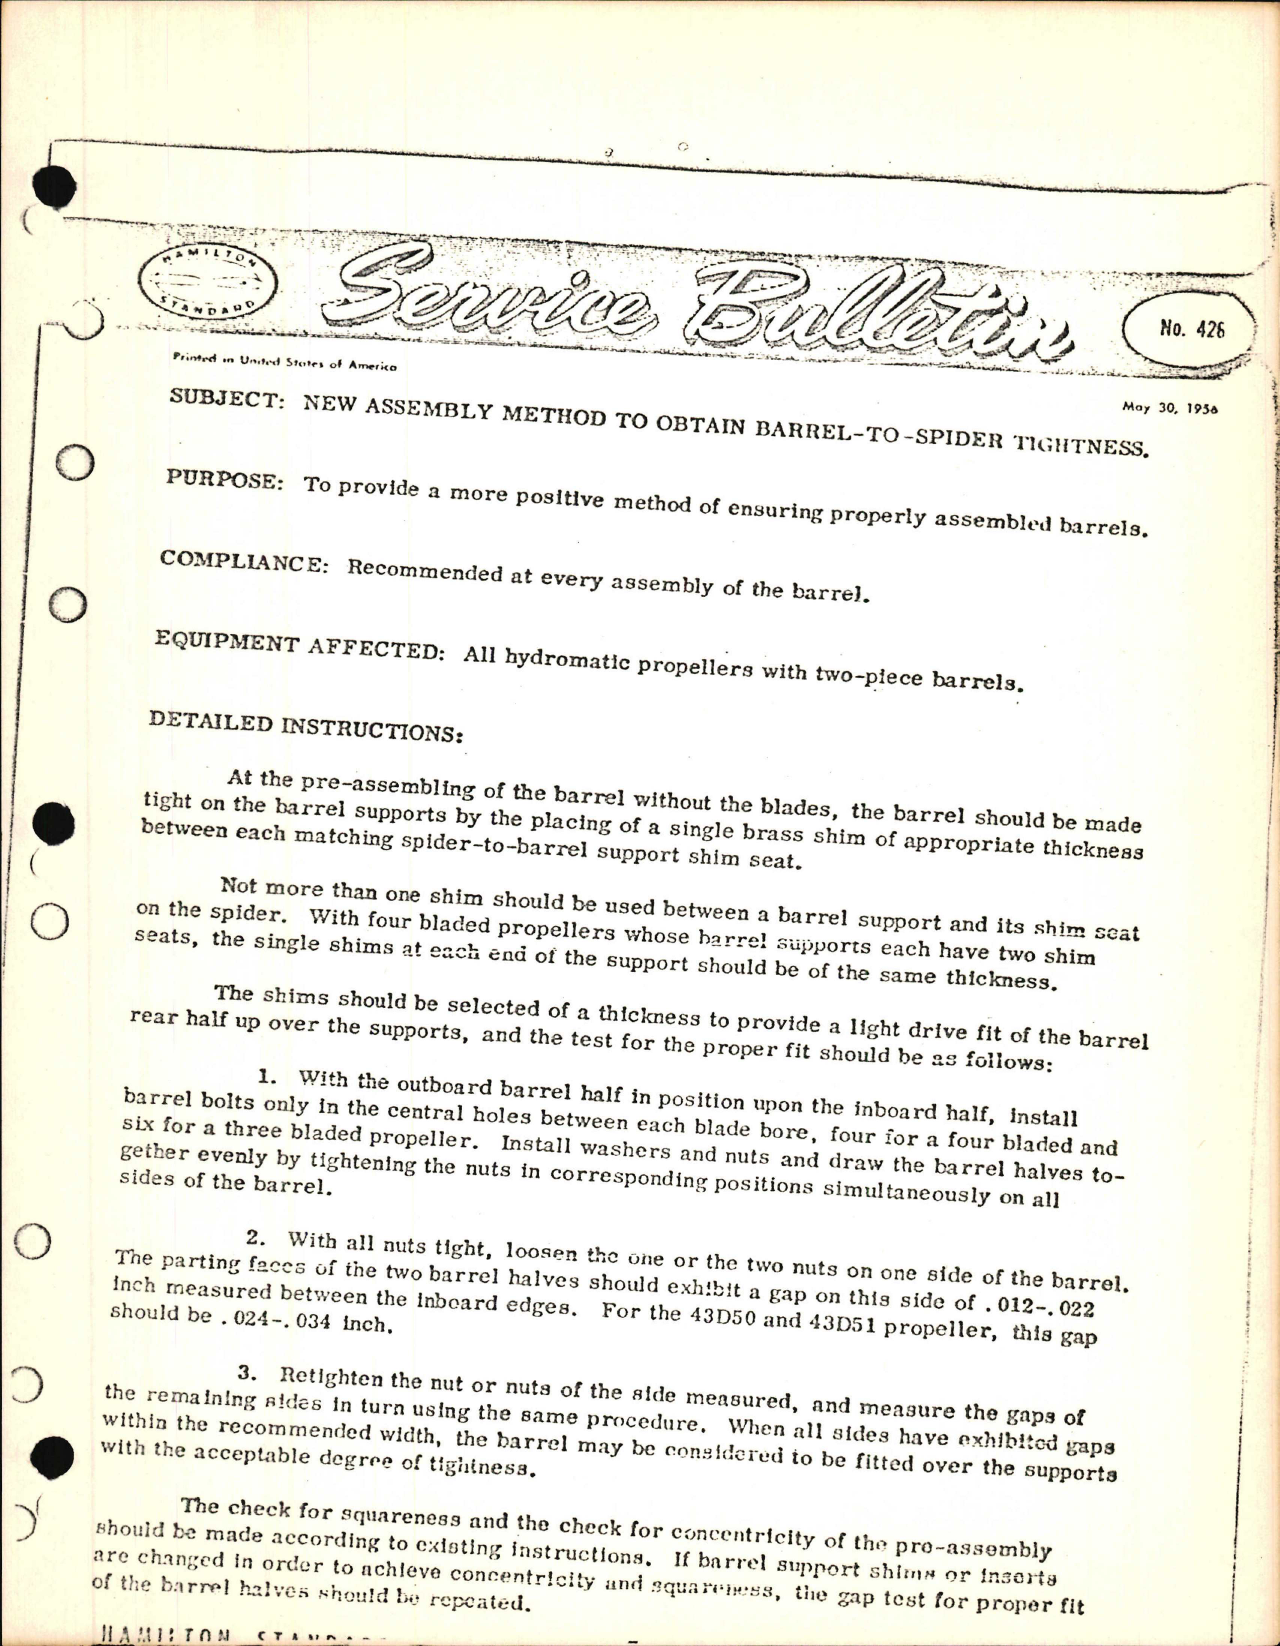 Sample page 1 from AirCorps Library document: New Assembly Method to Obtain Barrel to Spider Tightness